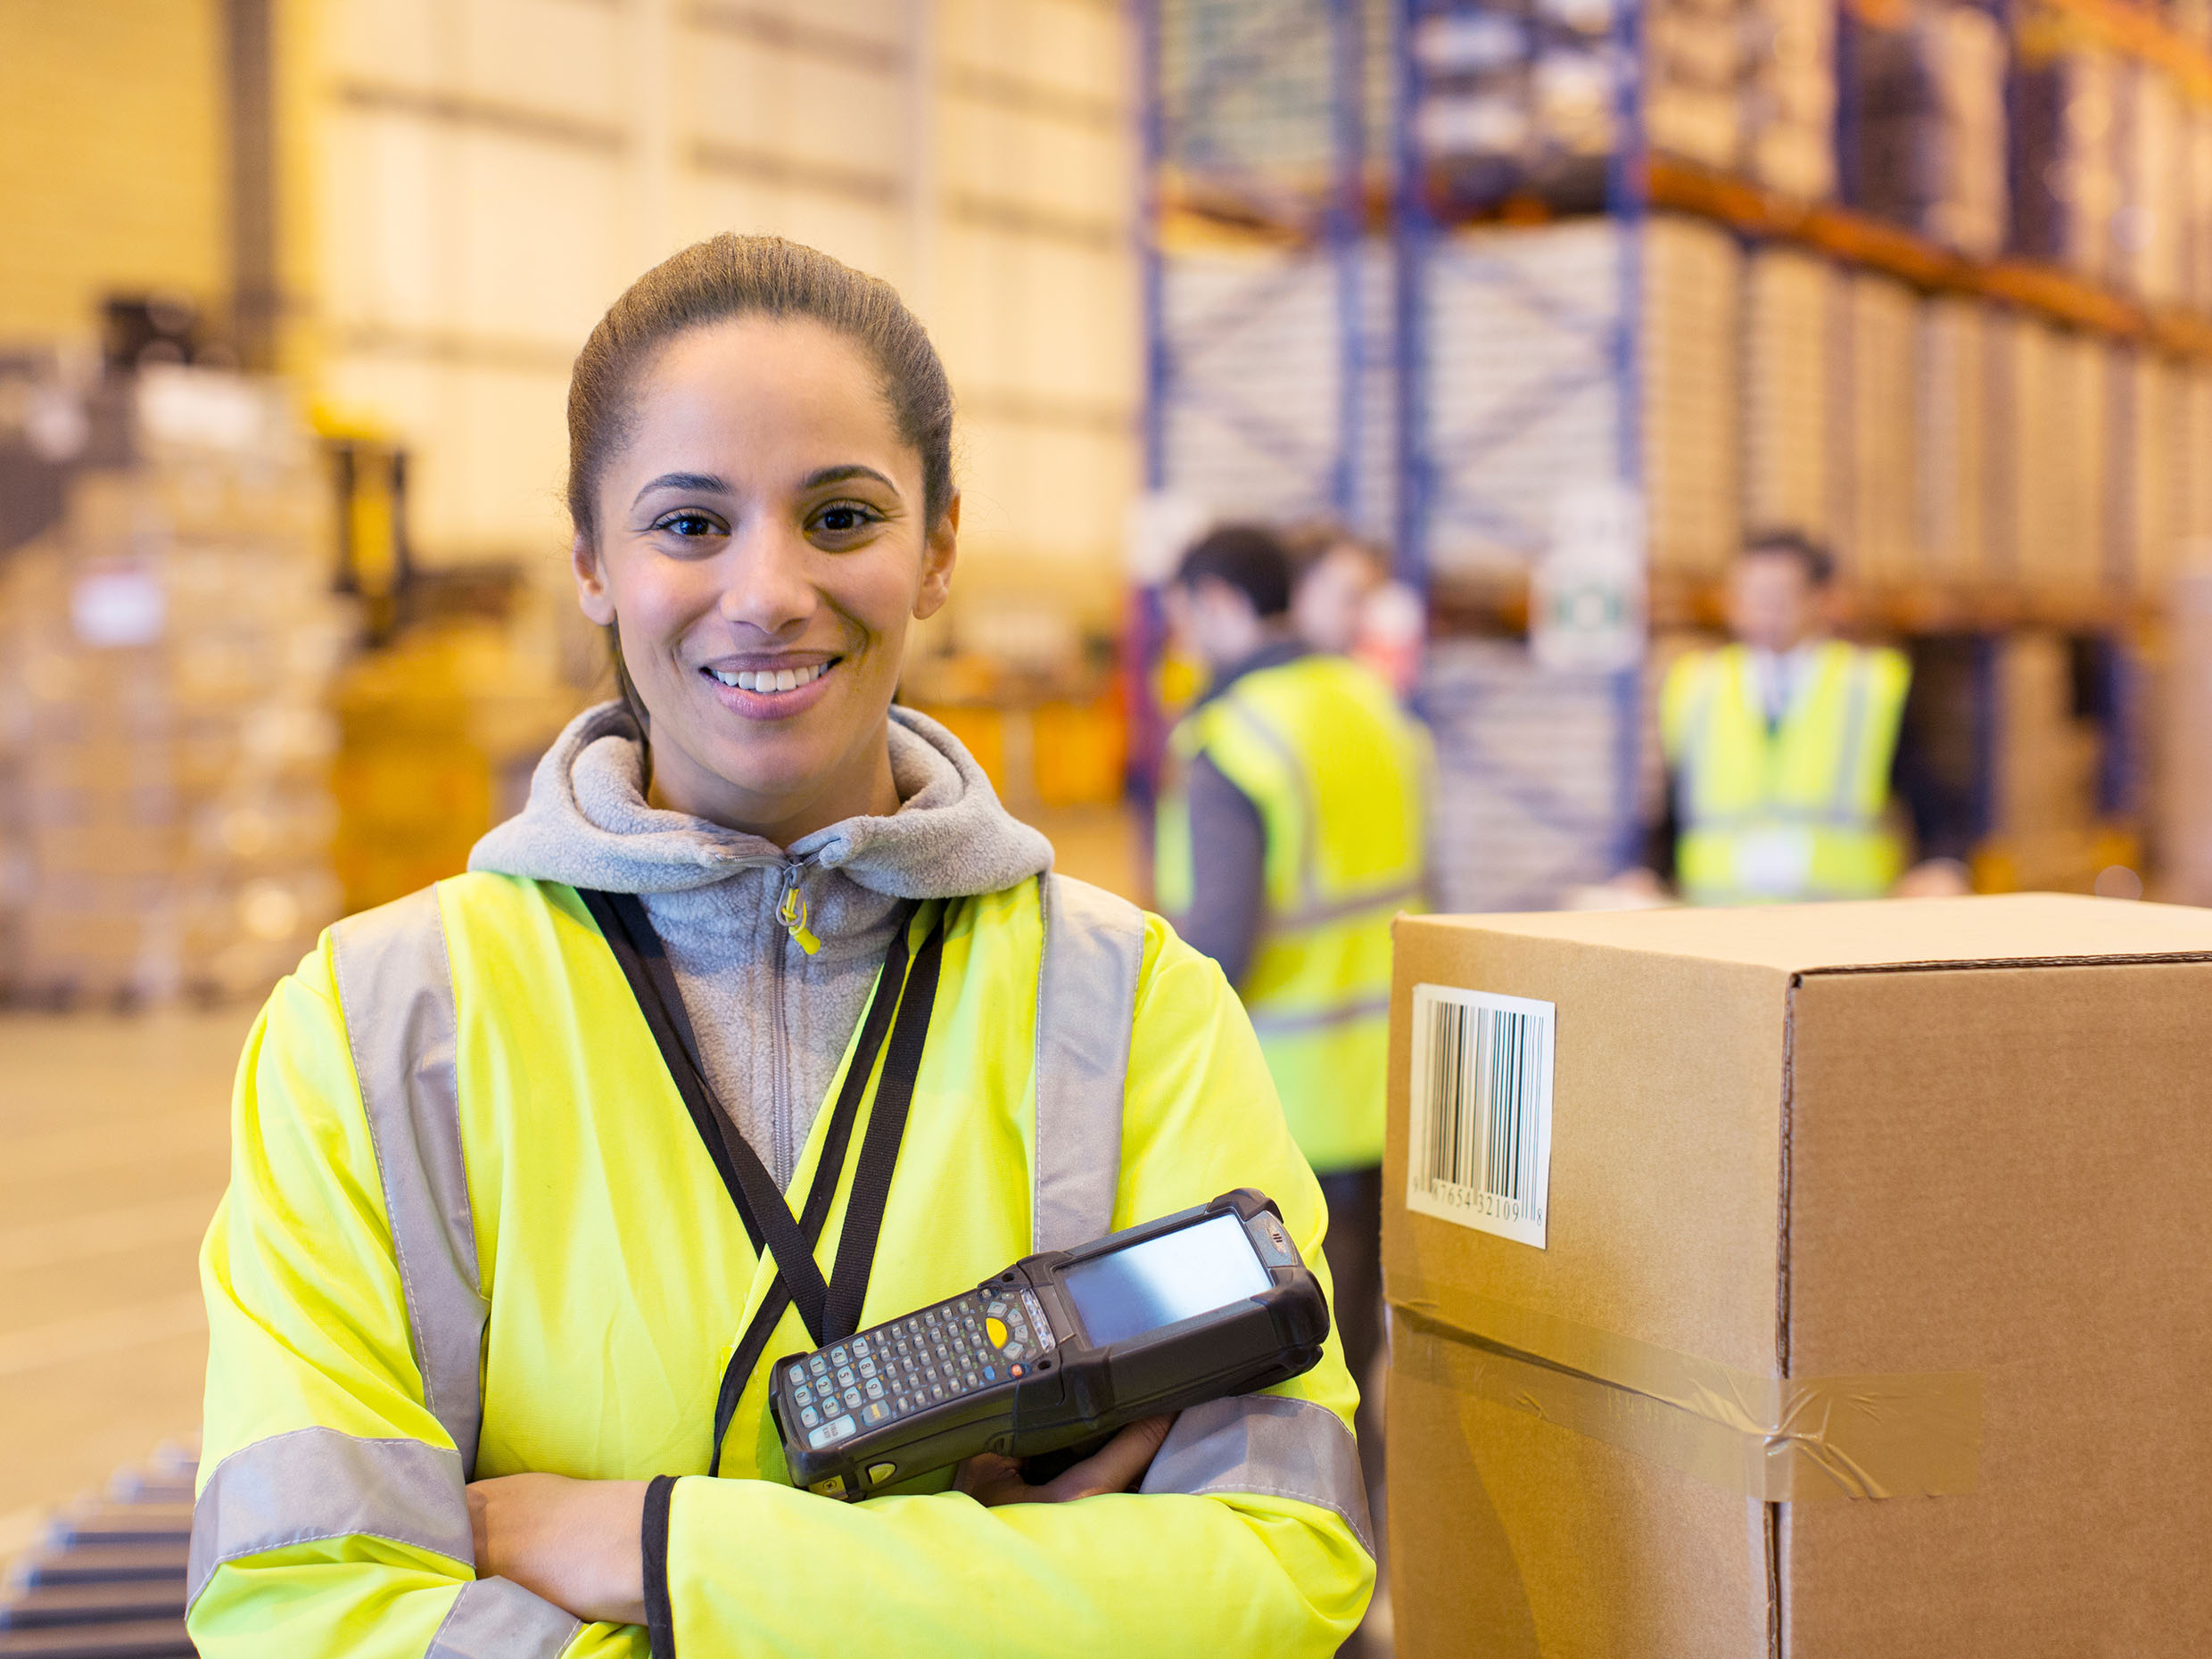 A happy logistics coordinator female standing in a warehouse and holding a pos terminal device in her hands.